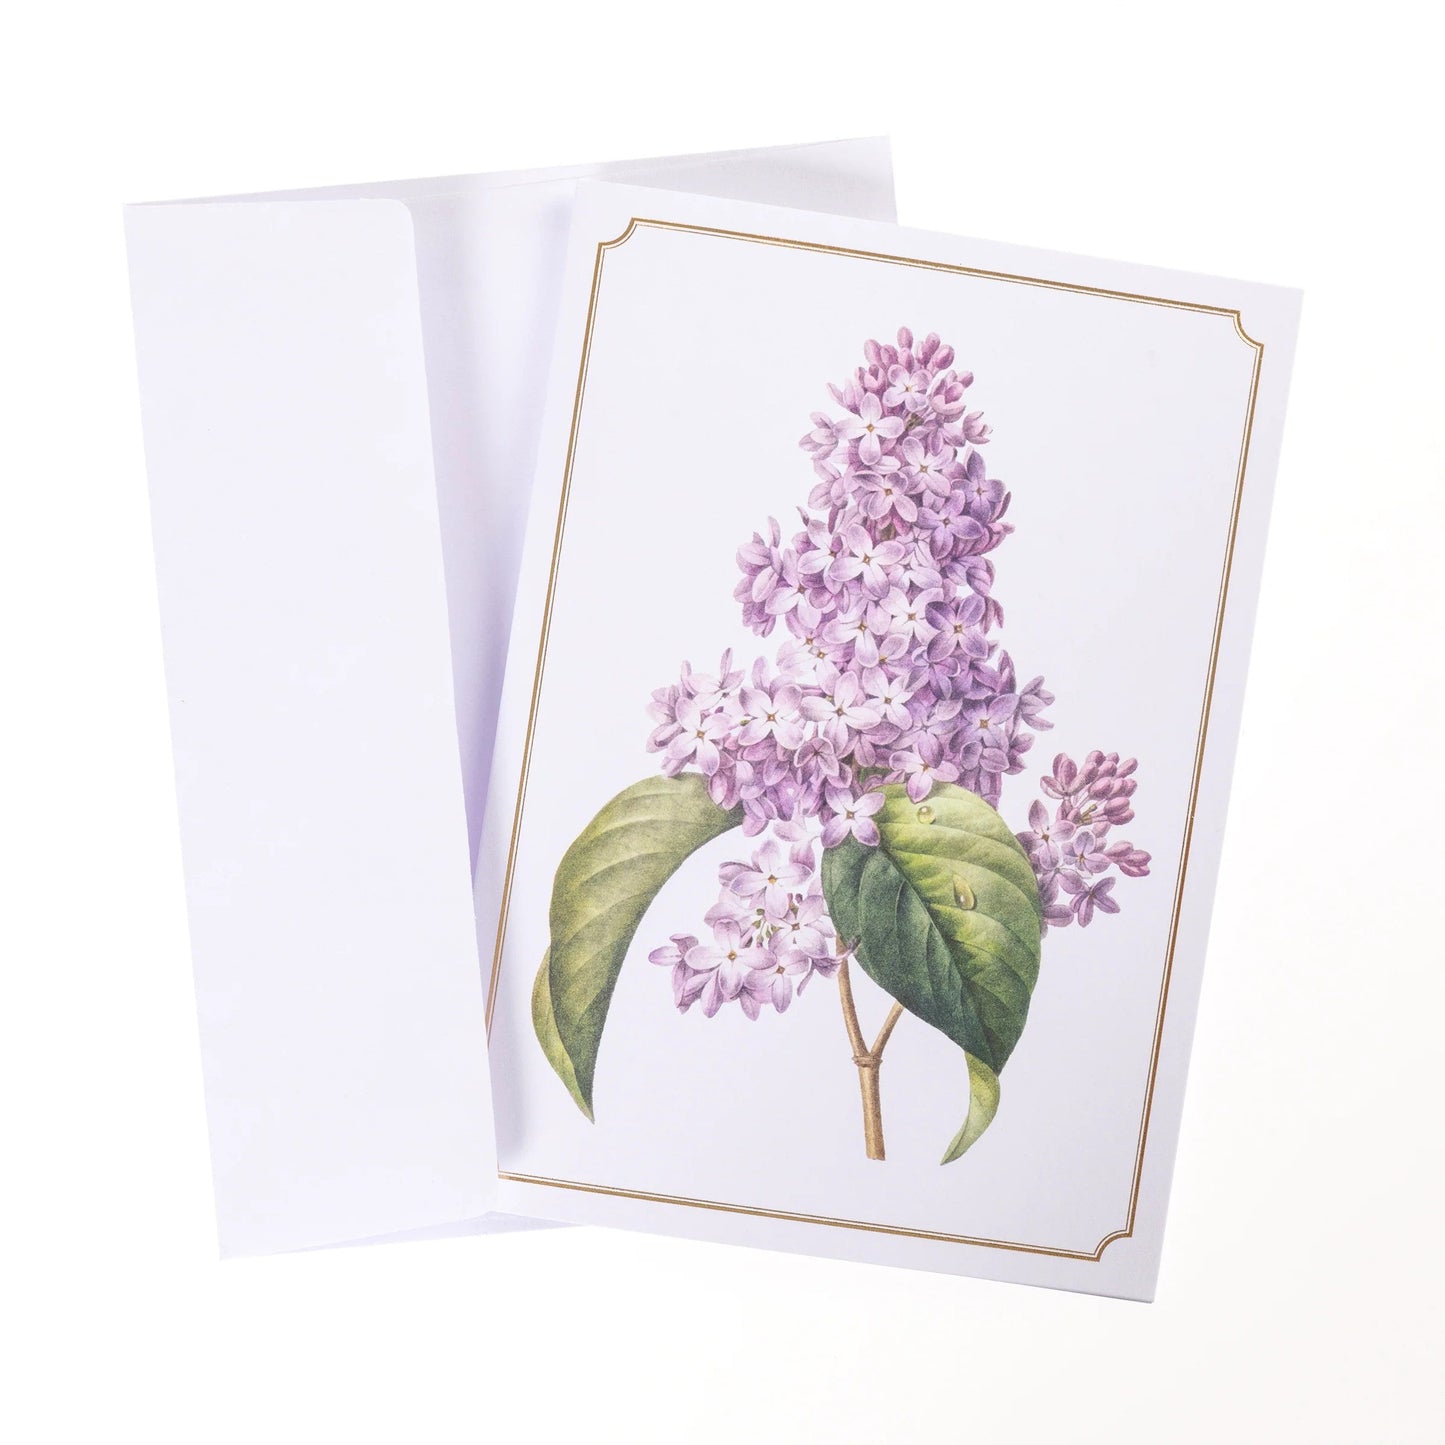 Vintage Floral Greeting Cards in Keepsake Boxed | Personalized Note Cards | 4.25"x 6"